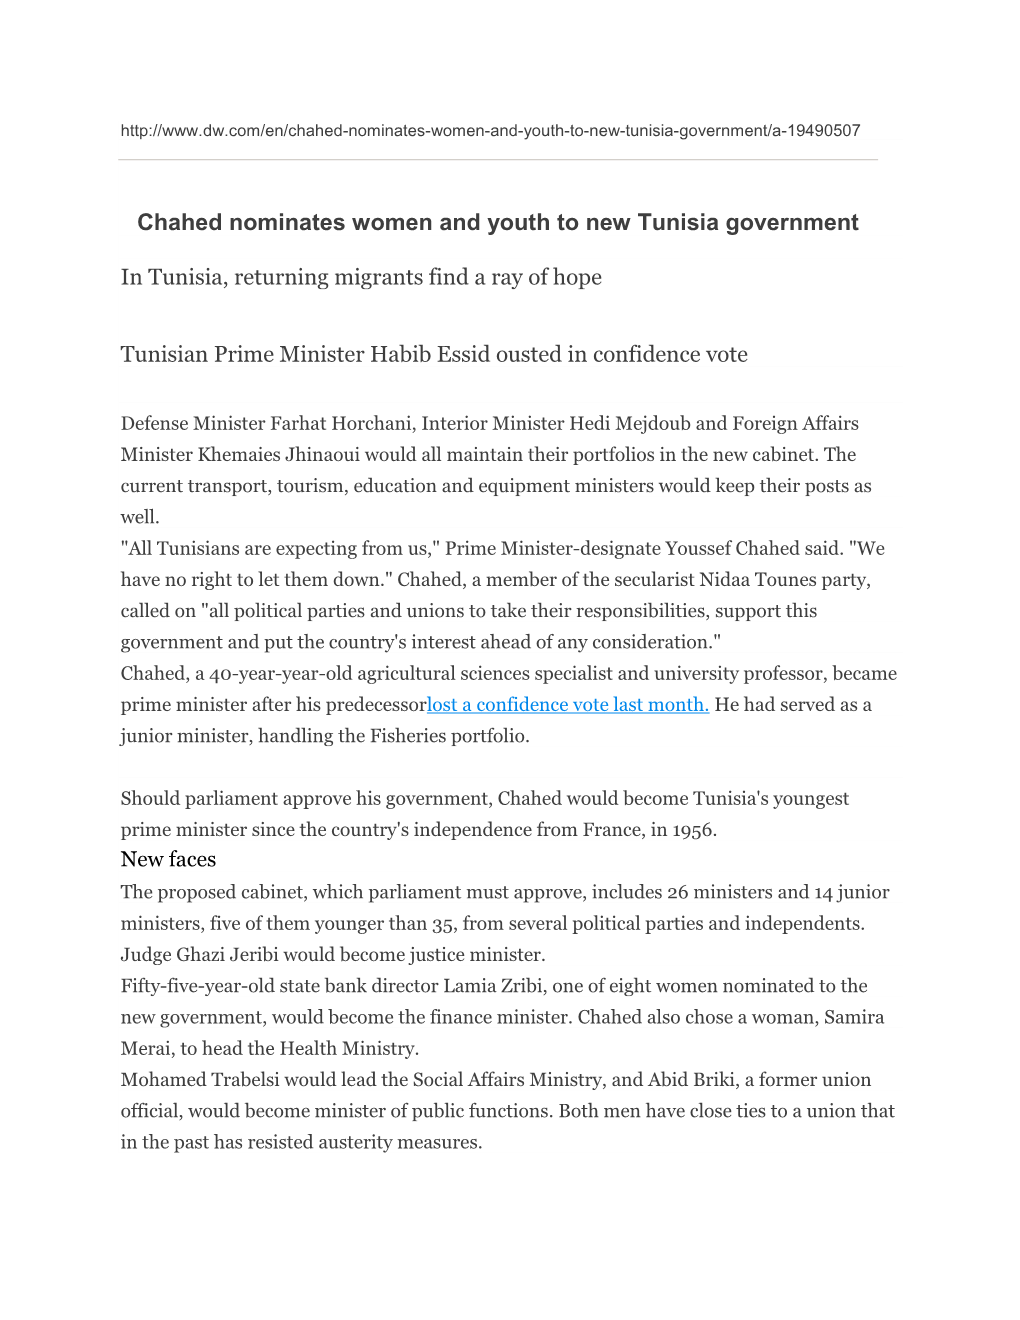 Chahed Nominates Women and Youth to New Tunisia Government